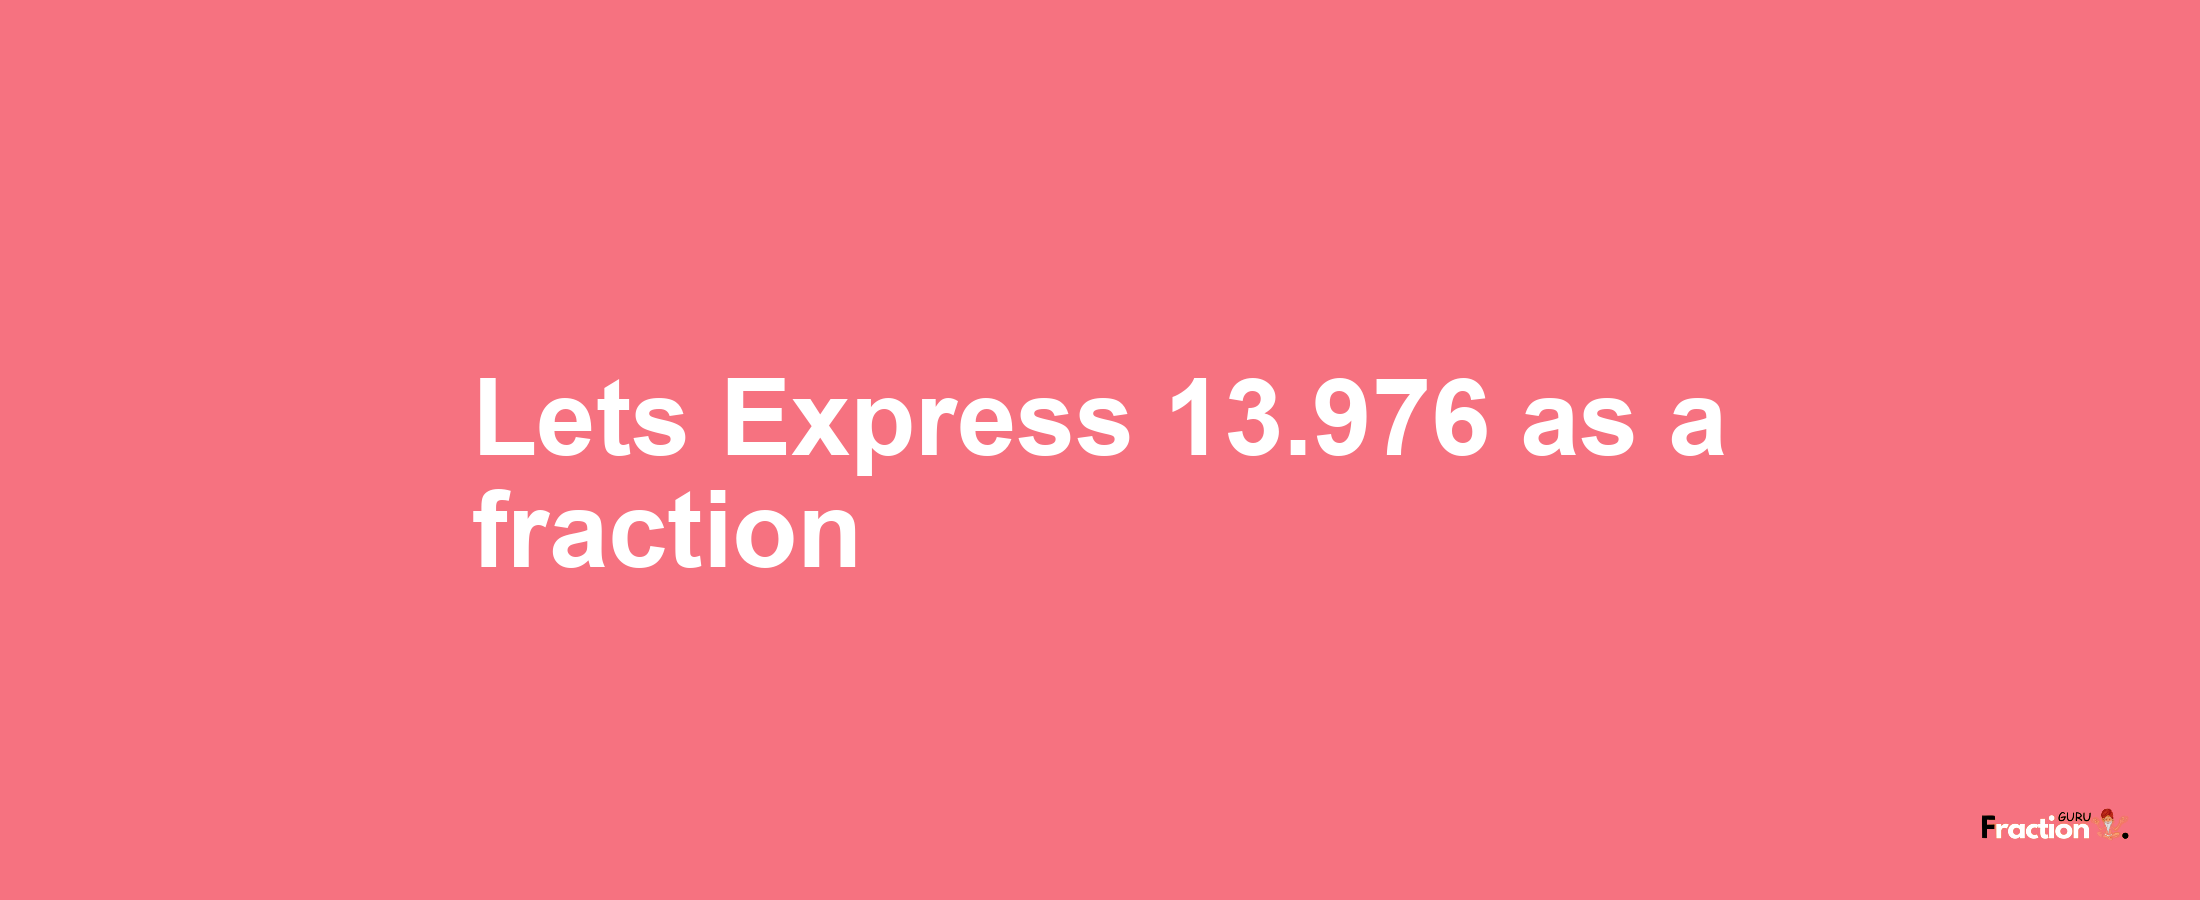 Lets Express 13.976 as afraction